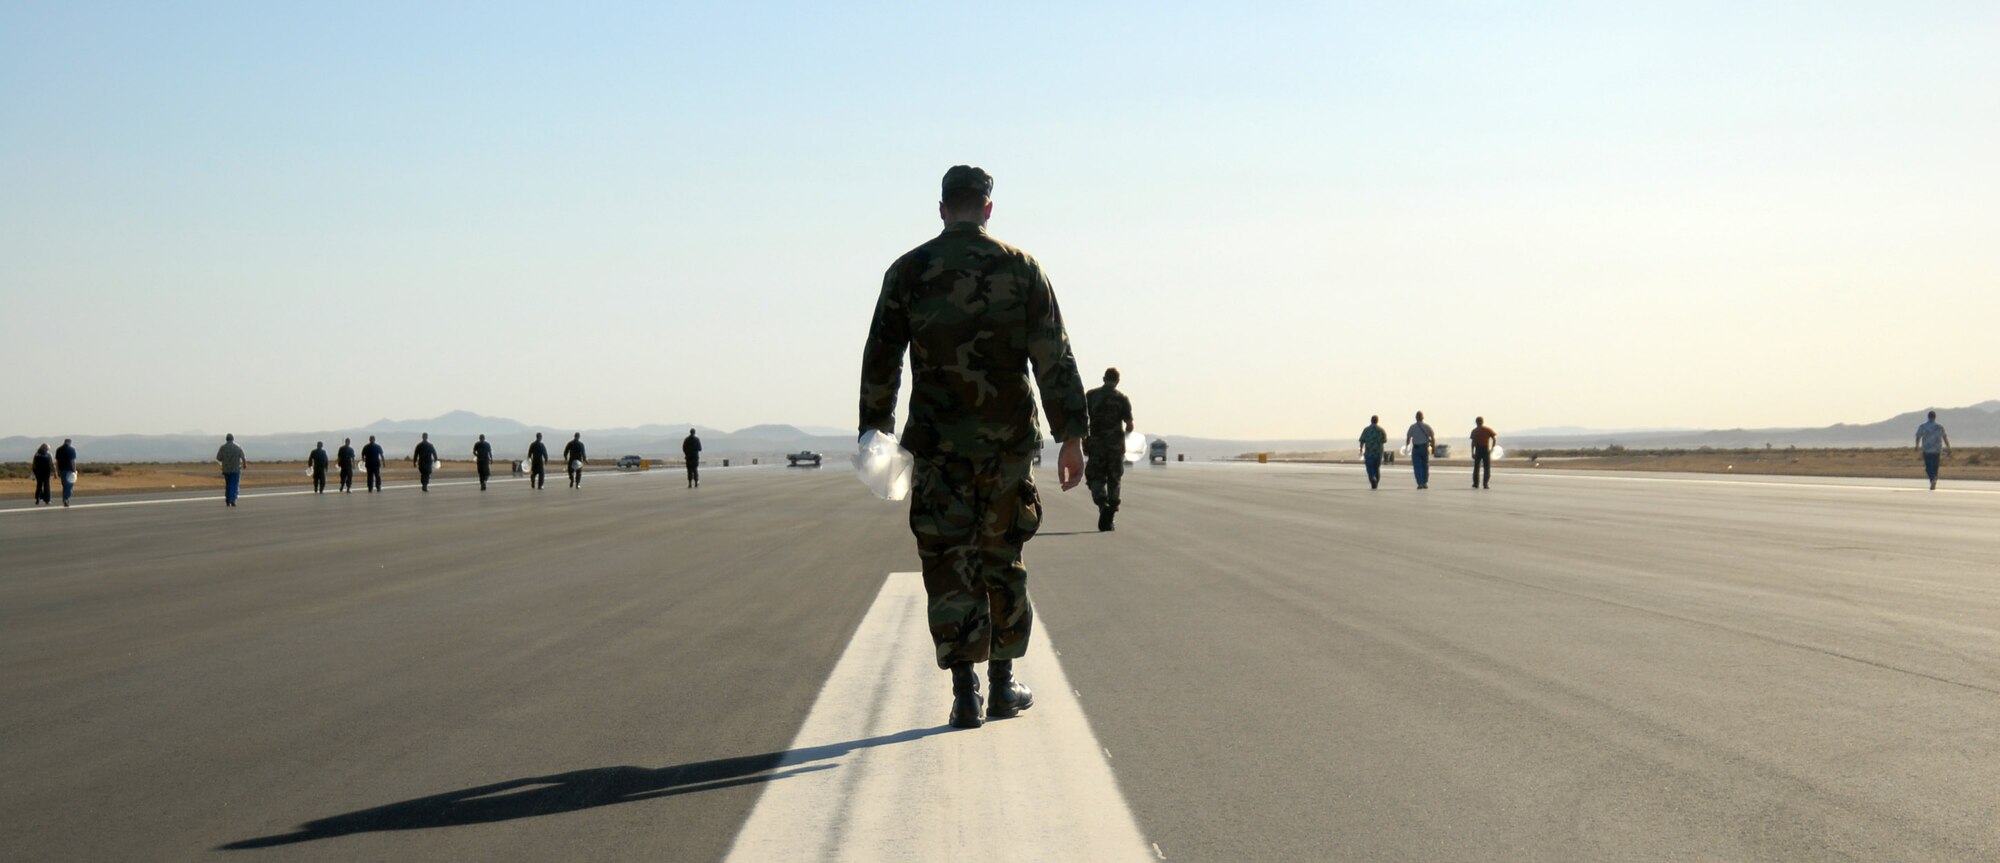 Edwards Airmen walk the new 12,000-foot long temporary main runway here during a foreign-object-debris walk on May 16. The temporary runway will be used while the U.S. Army Corps of Engineers conducts a $103 million project to replace the majority of the 50-plus-year old primary runway 04/22. (Air Force photo by Senior Airman Julius Delos Reyes)